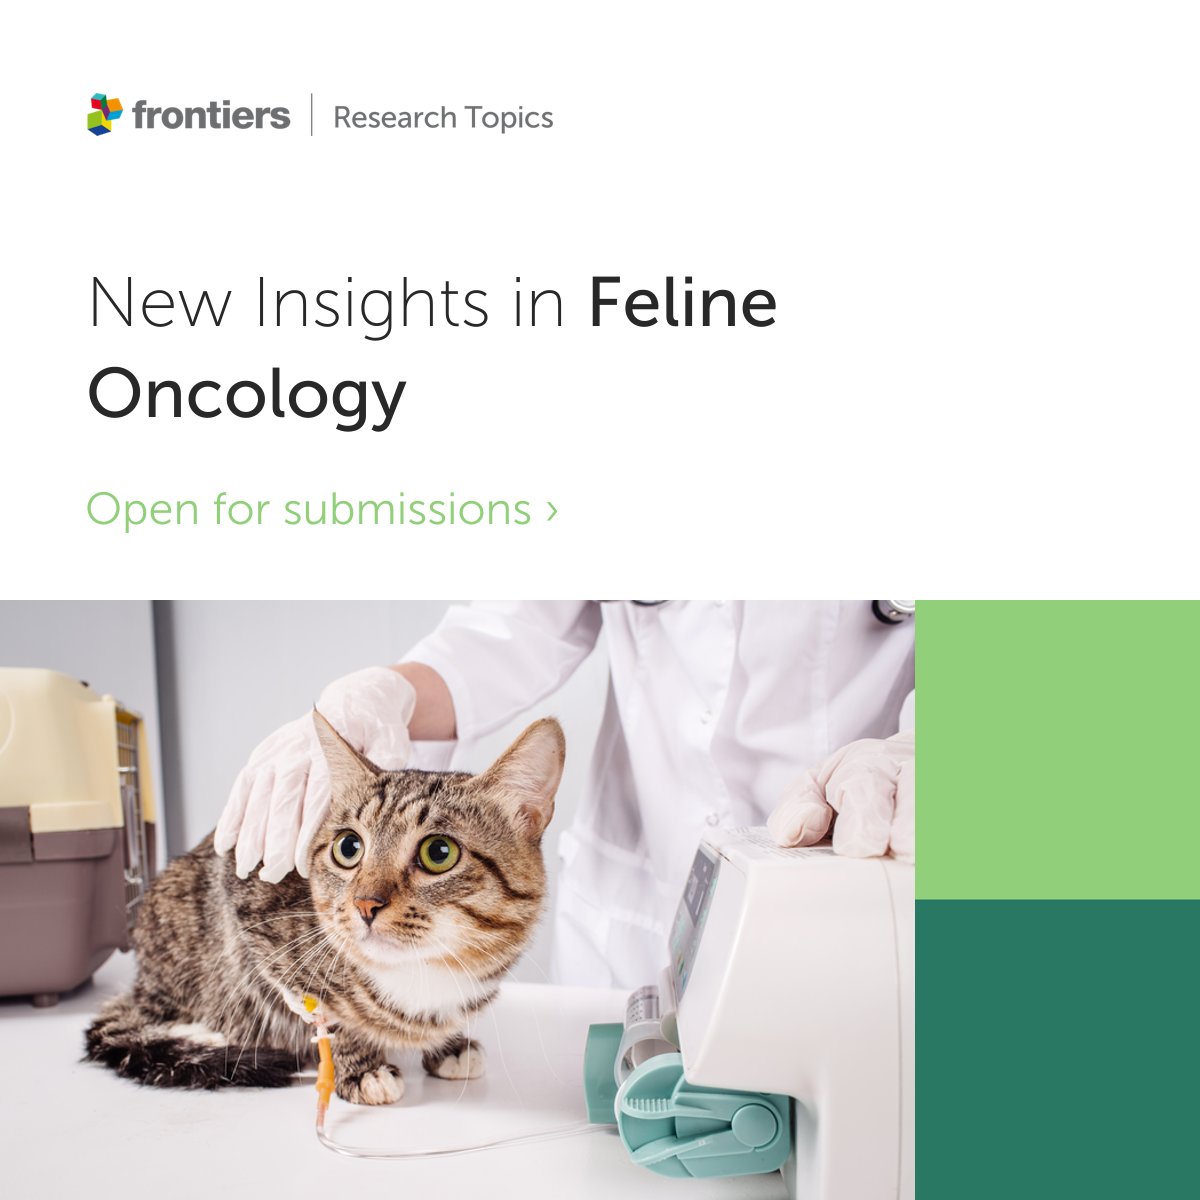 🚨 Deadline approaching 📅 27 April 2024 📖 Last chance to submit your #Paper to this special issue about new insights in feline oncology. #veterinary #Veterinarians #Research #researchers Discover more 👉fro.ntiers.in/52902